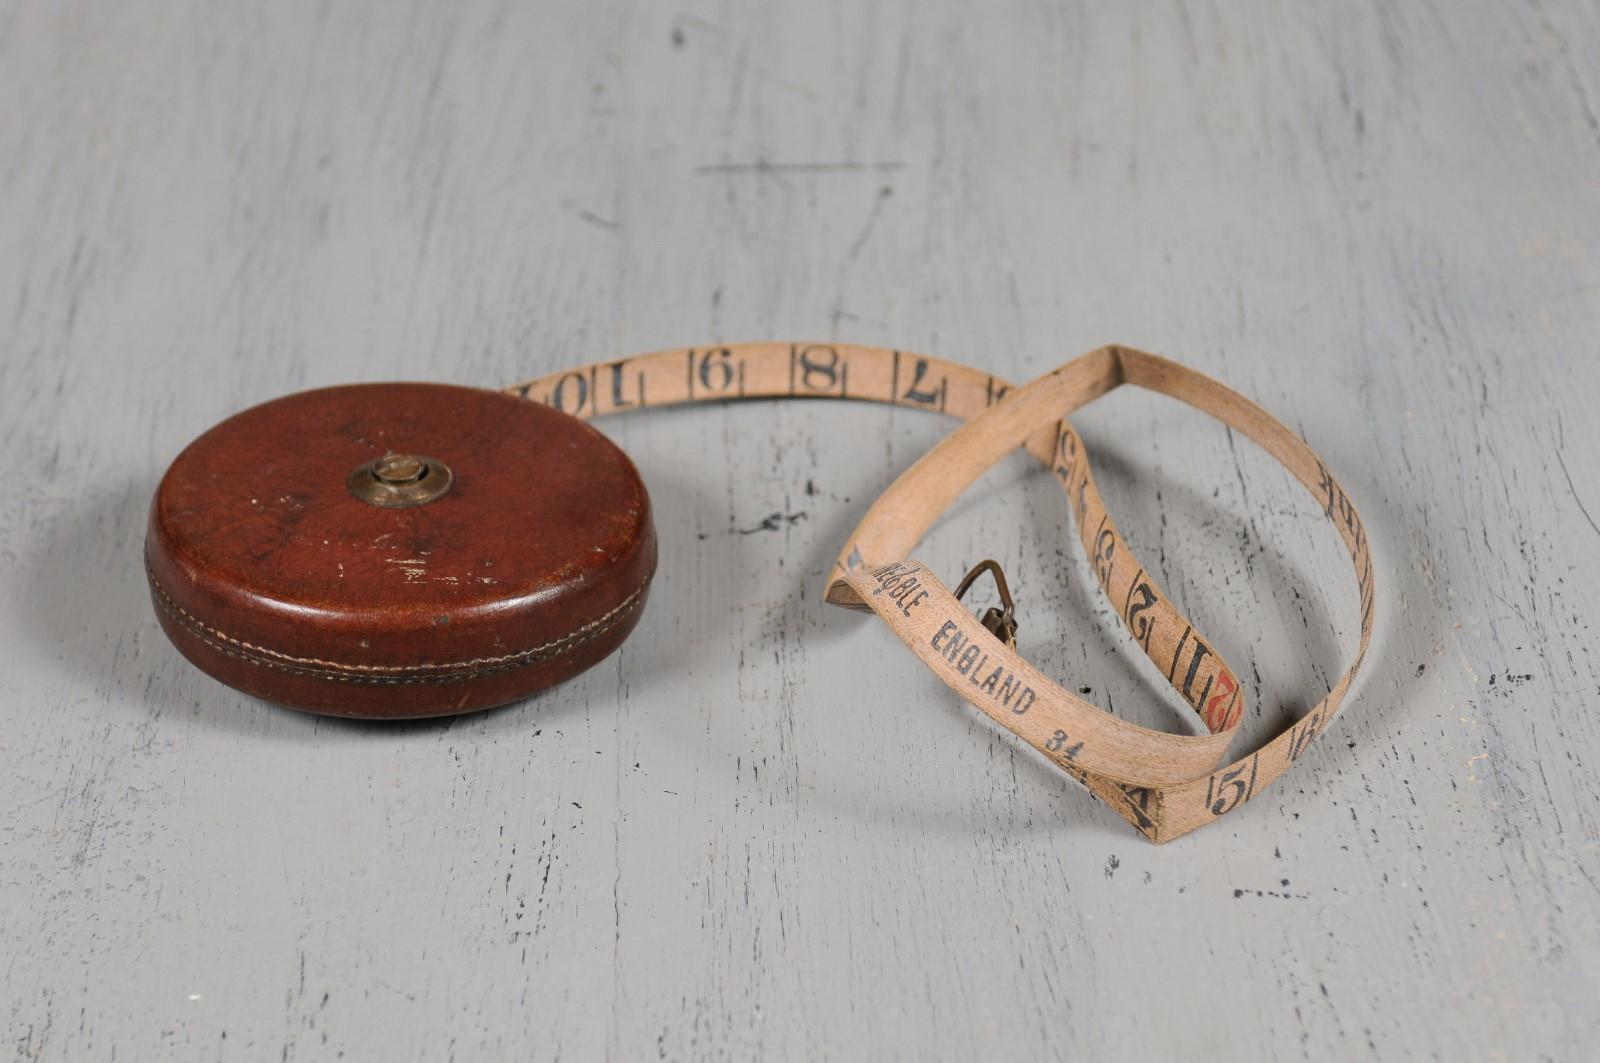 An English leather case 50 feet retractable tape measure from the 19th century marked Treble England. Born in England during the 19th century, this tape measure features a brown leather case with brass winder. Marked 